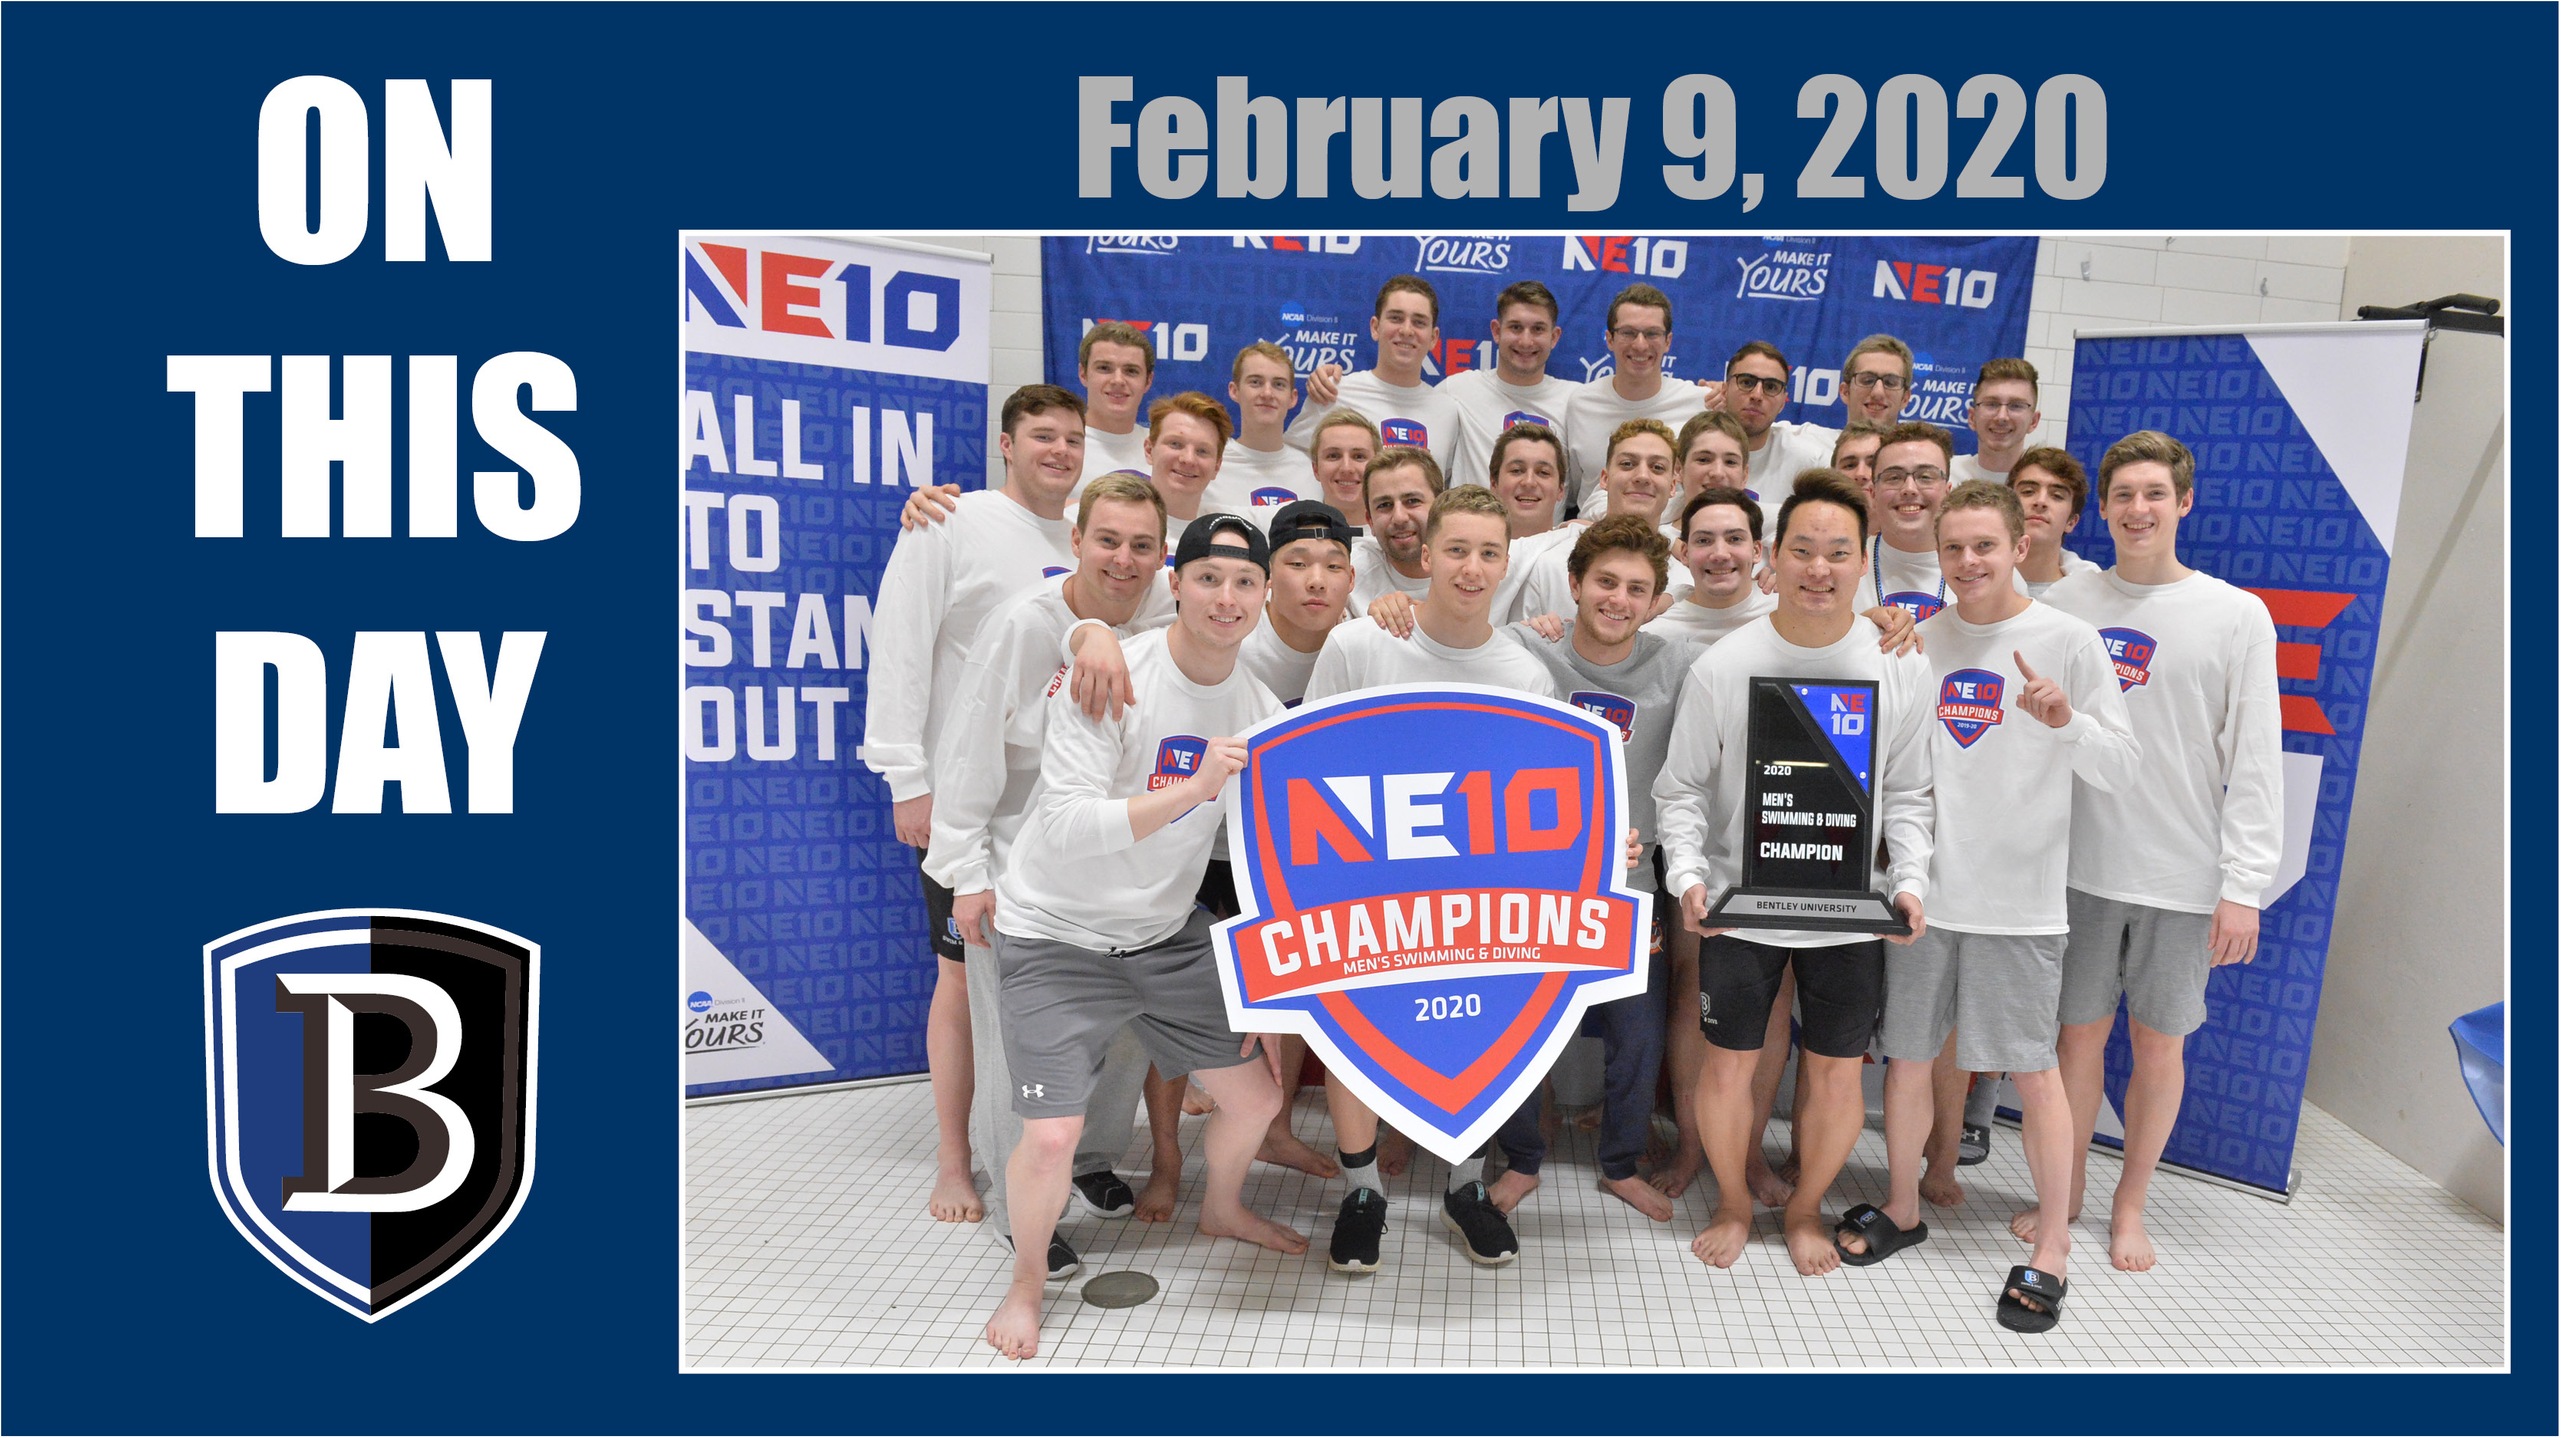 Graphic featuring the 2019-20 Bentley men's swimming team